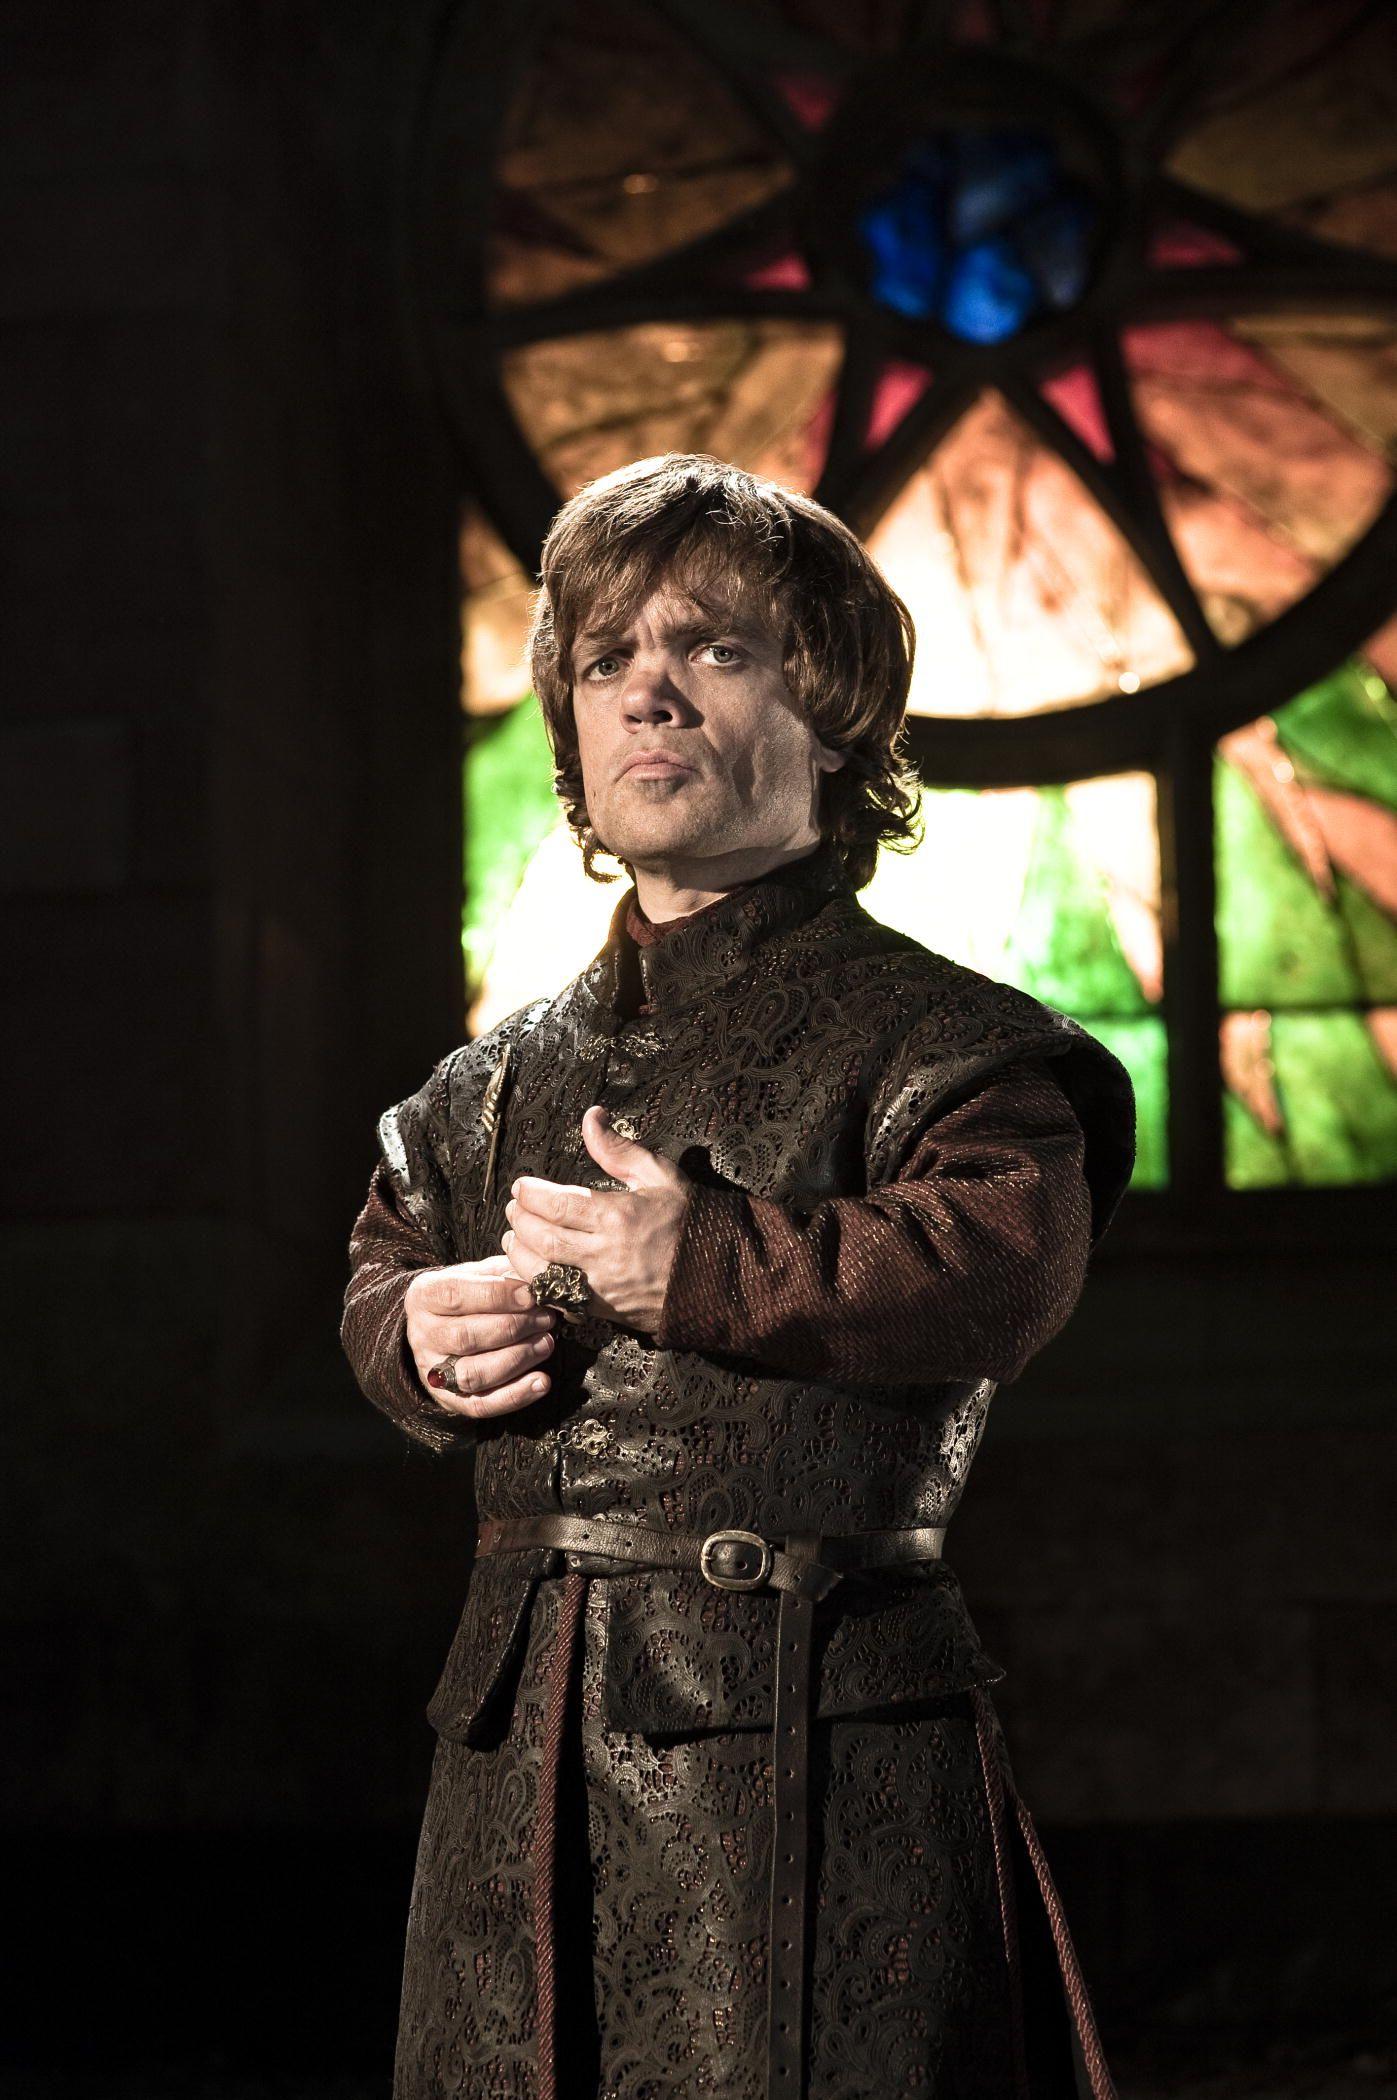 tyrion lannister quotes s07e03